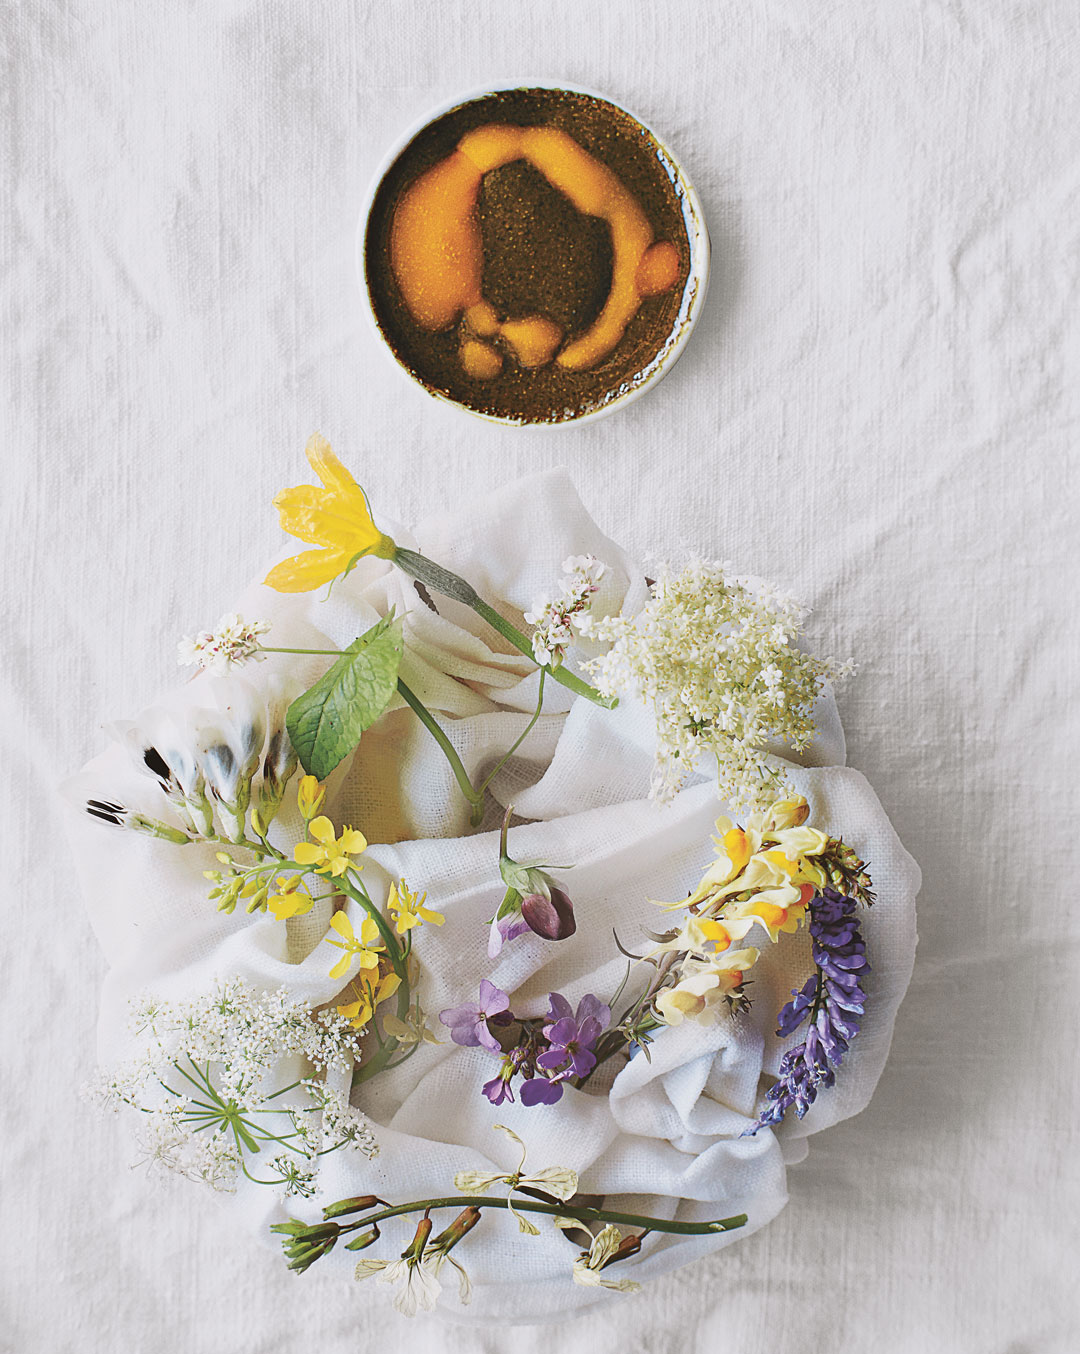 A plateful of flowers and some vinaigrette. From A Work in Progress: A Journal 